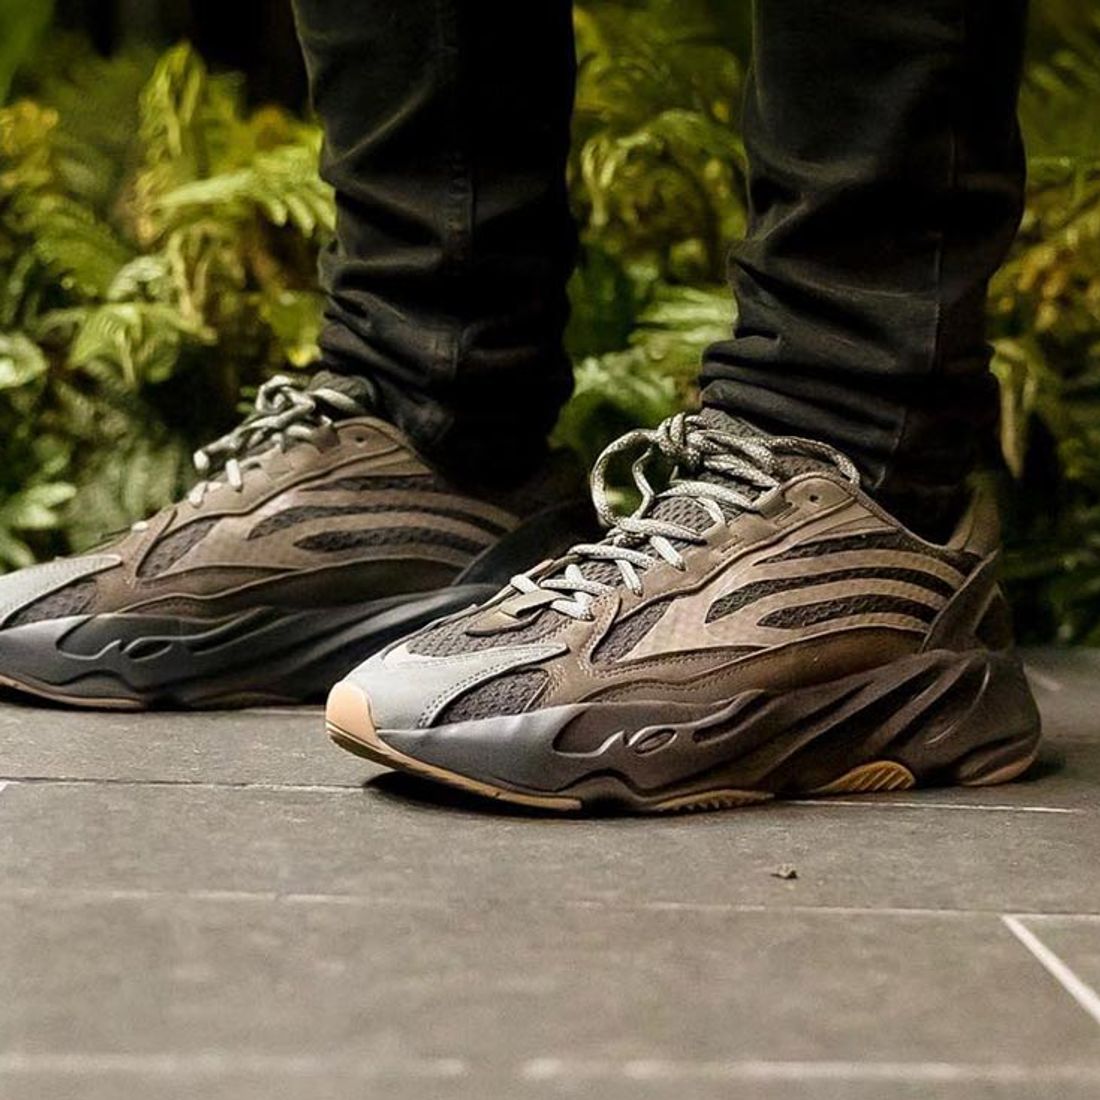 rulle Evne kamera Here's How People Are Styling the Yeezy 700 'Geode' - Sneaker Freaker